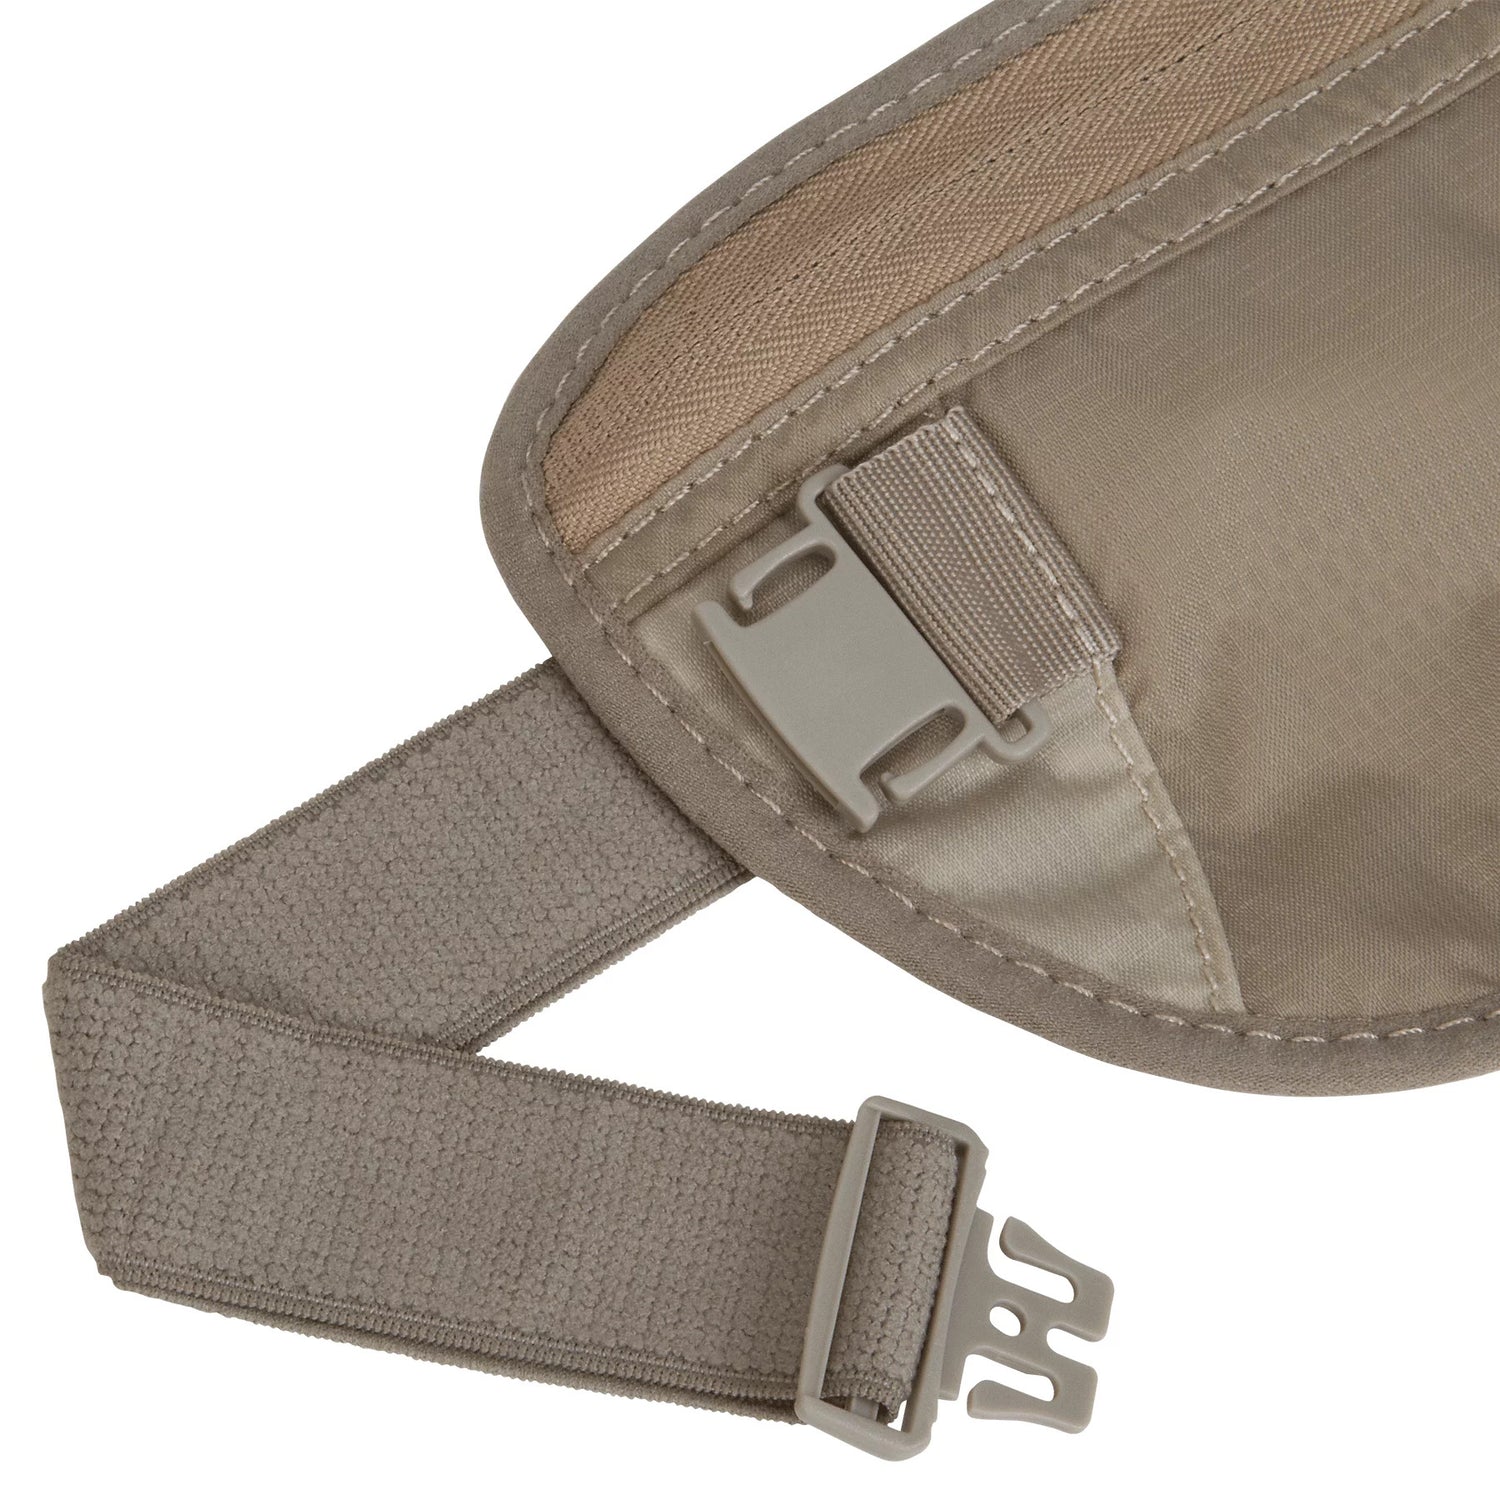 Best Money Belts and Pouches to Keep Valuables Secure